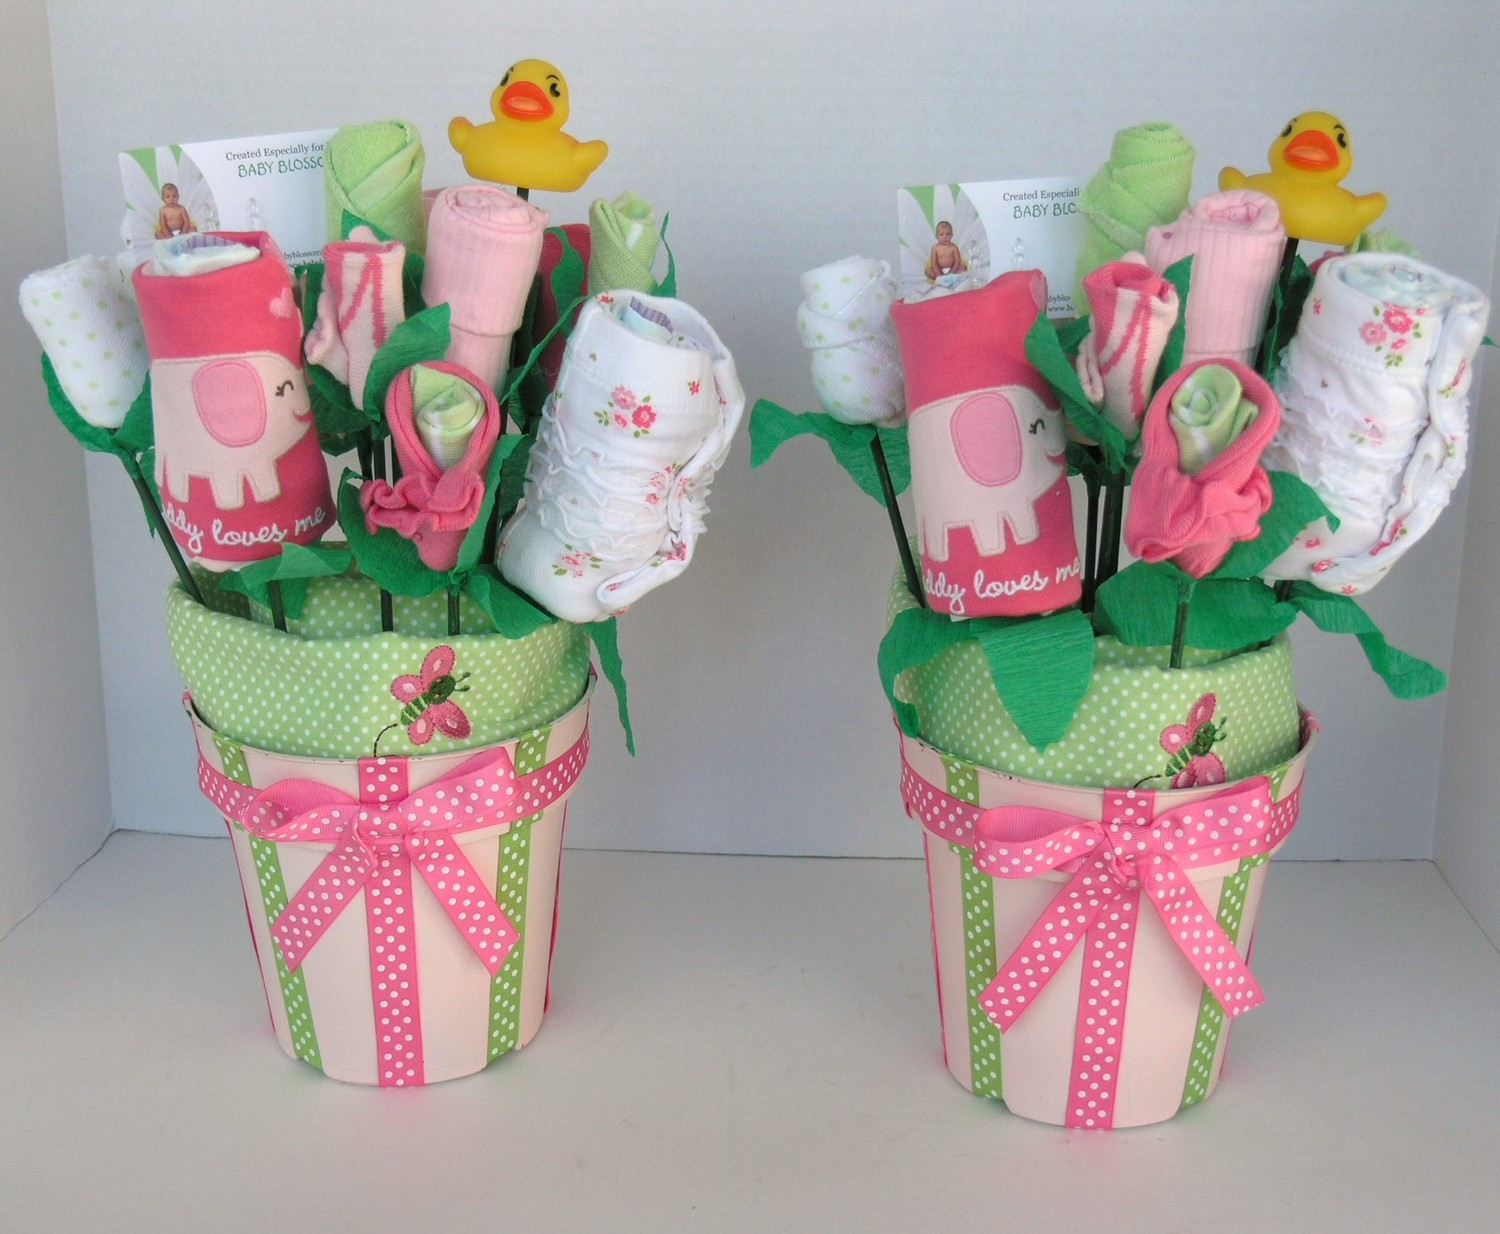 Cute Gift Ideas For Baby Shower
 Five Best DIY Baby Gifting Ideas for The Little Special